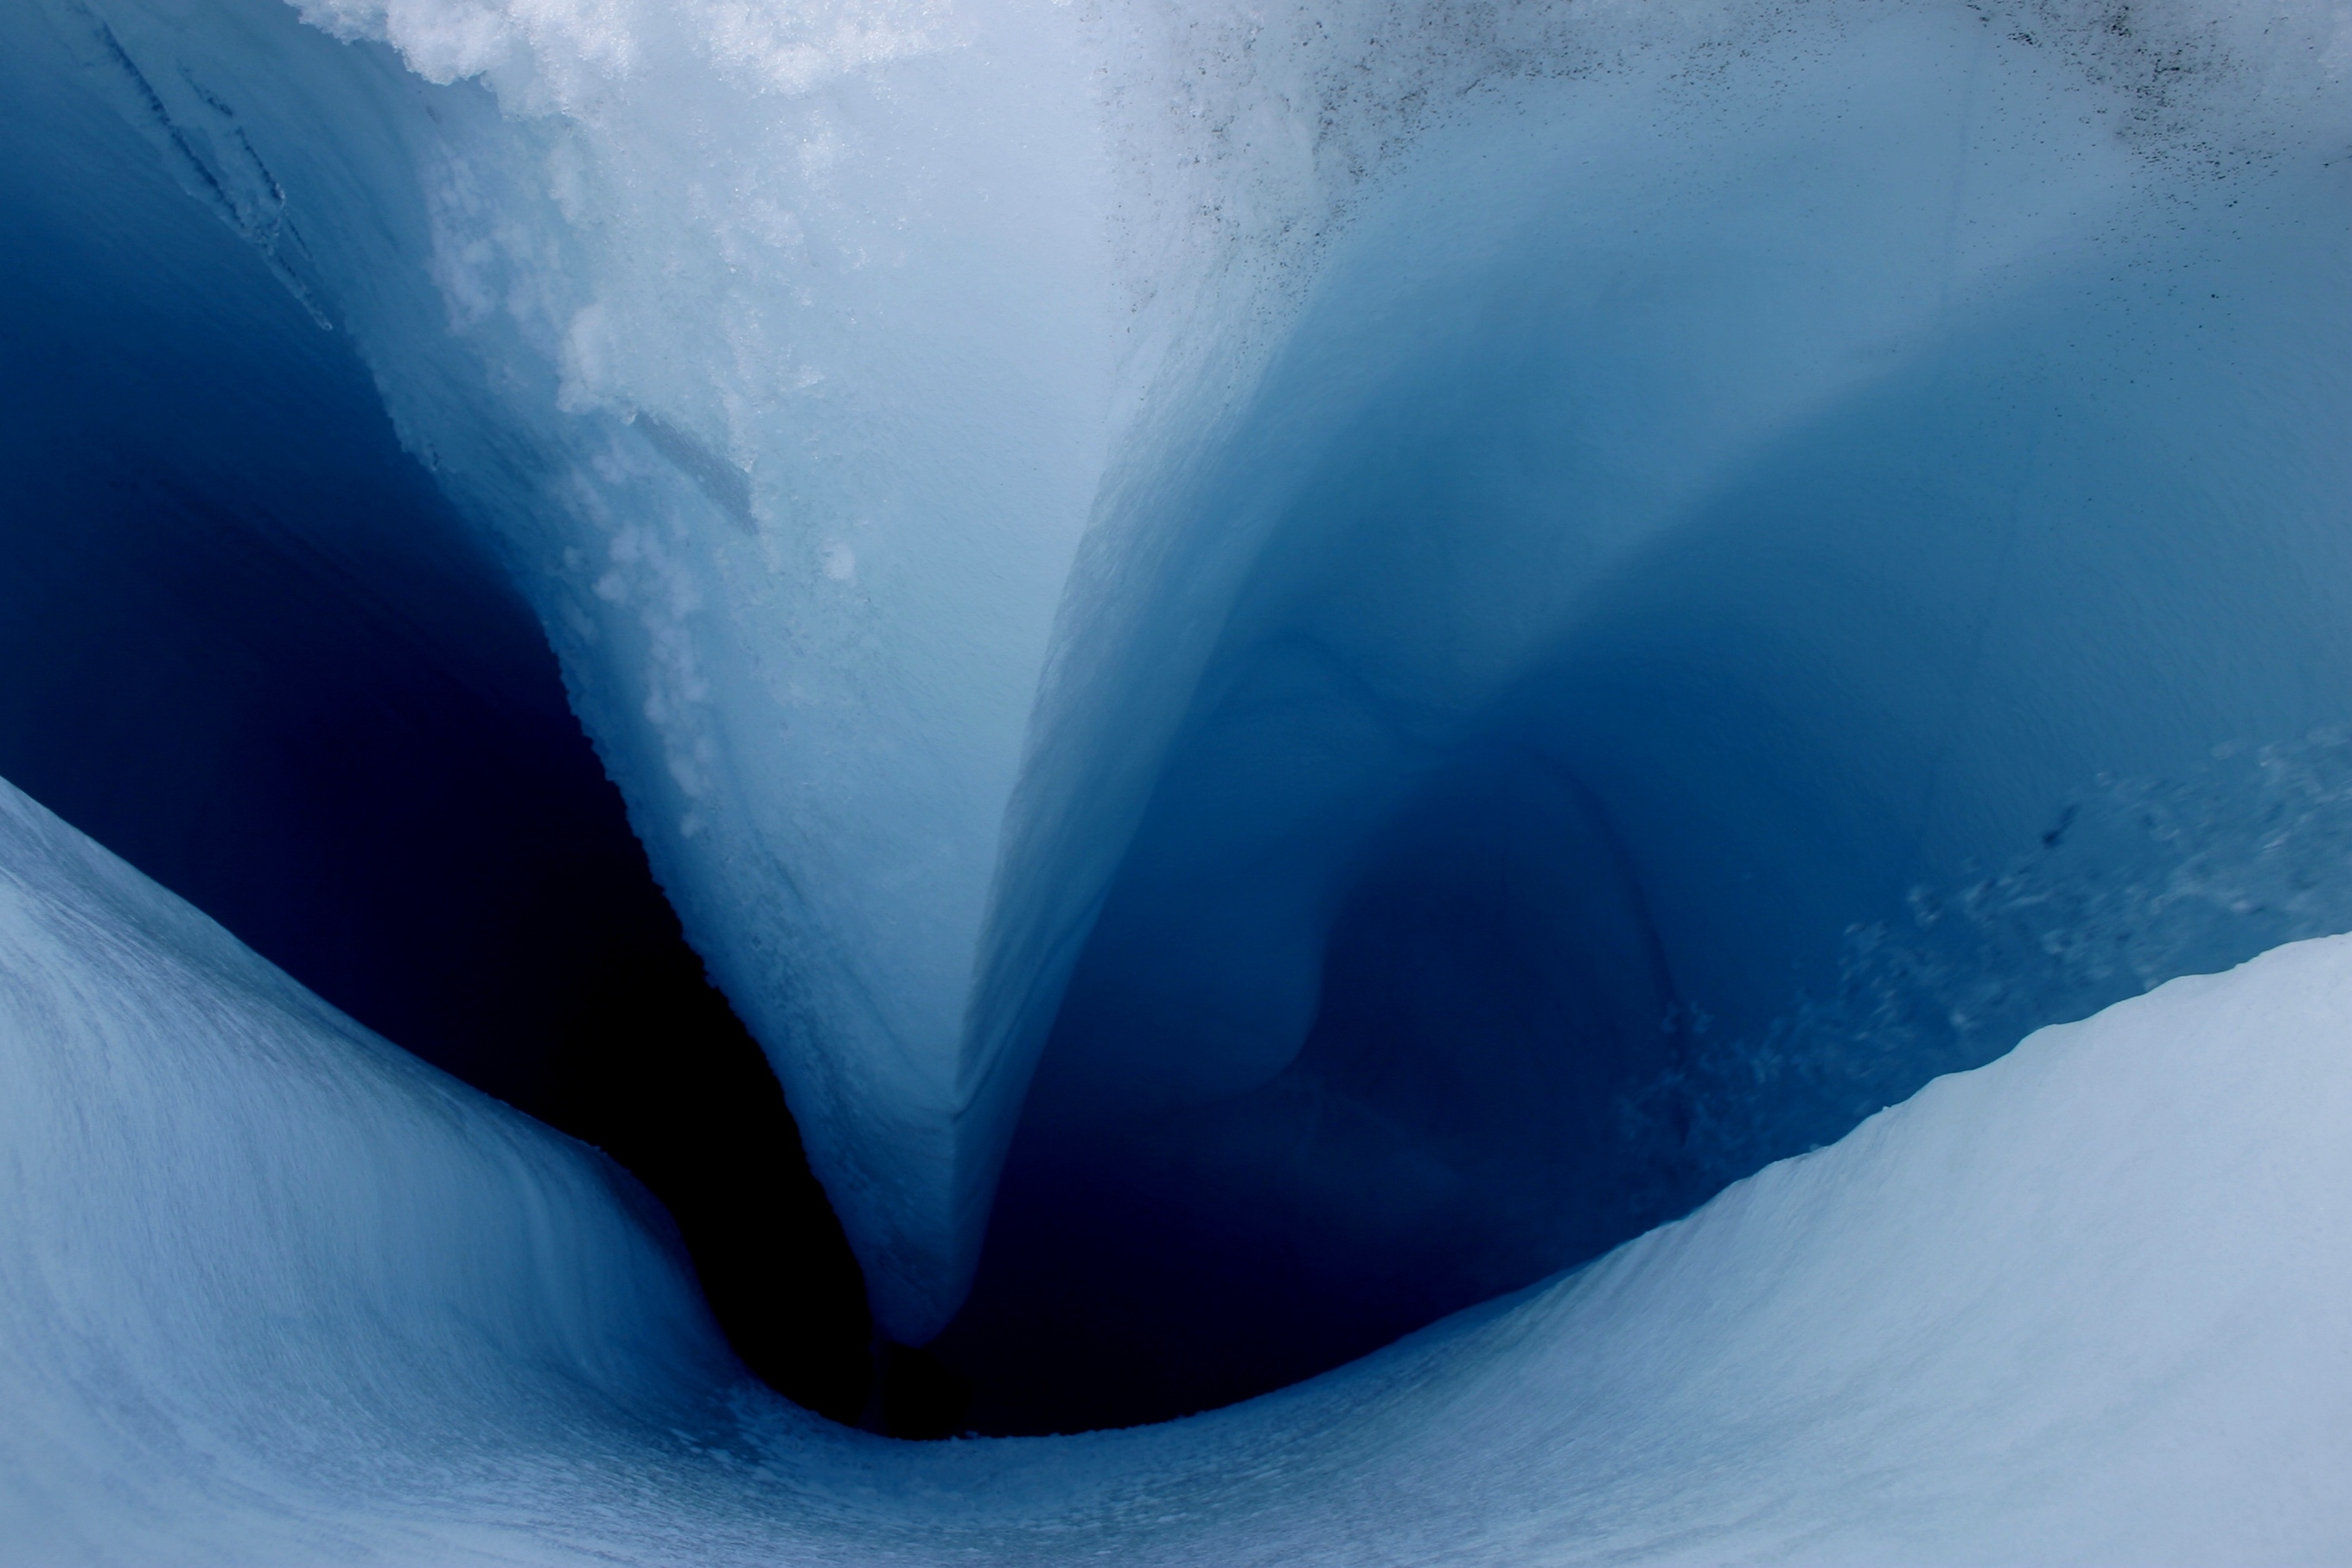 Meltwater from the surface of the Sermeq Avannarleq Glacier drains down toward interior ice (see falling droplets at right). This photograph depicts a region about 16 kilometers (10 miles) from the ice sheet margin in Southwest Greenland. CREDIT: William Colgan/CIRES